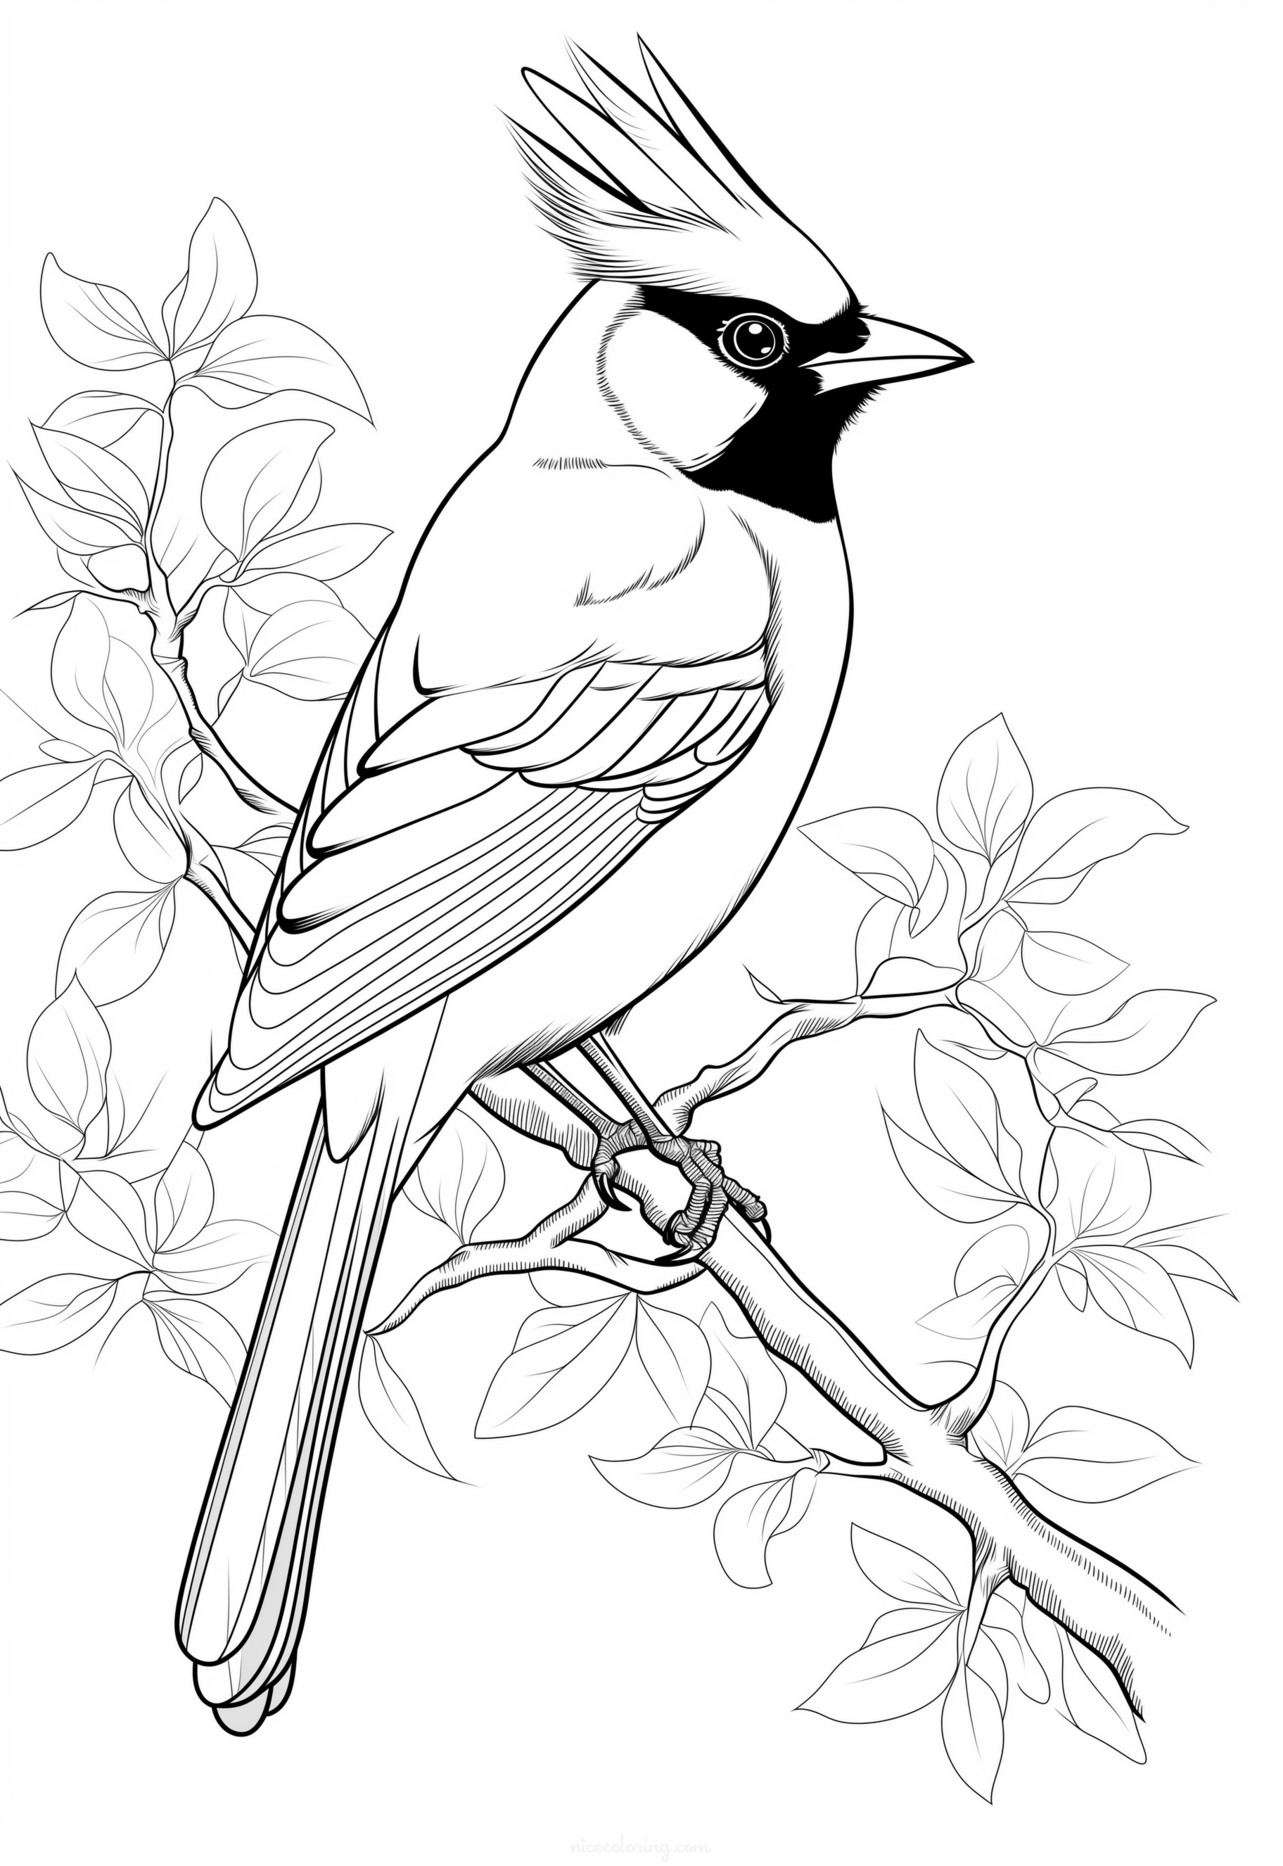 Birds perched on branches coloring page